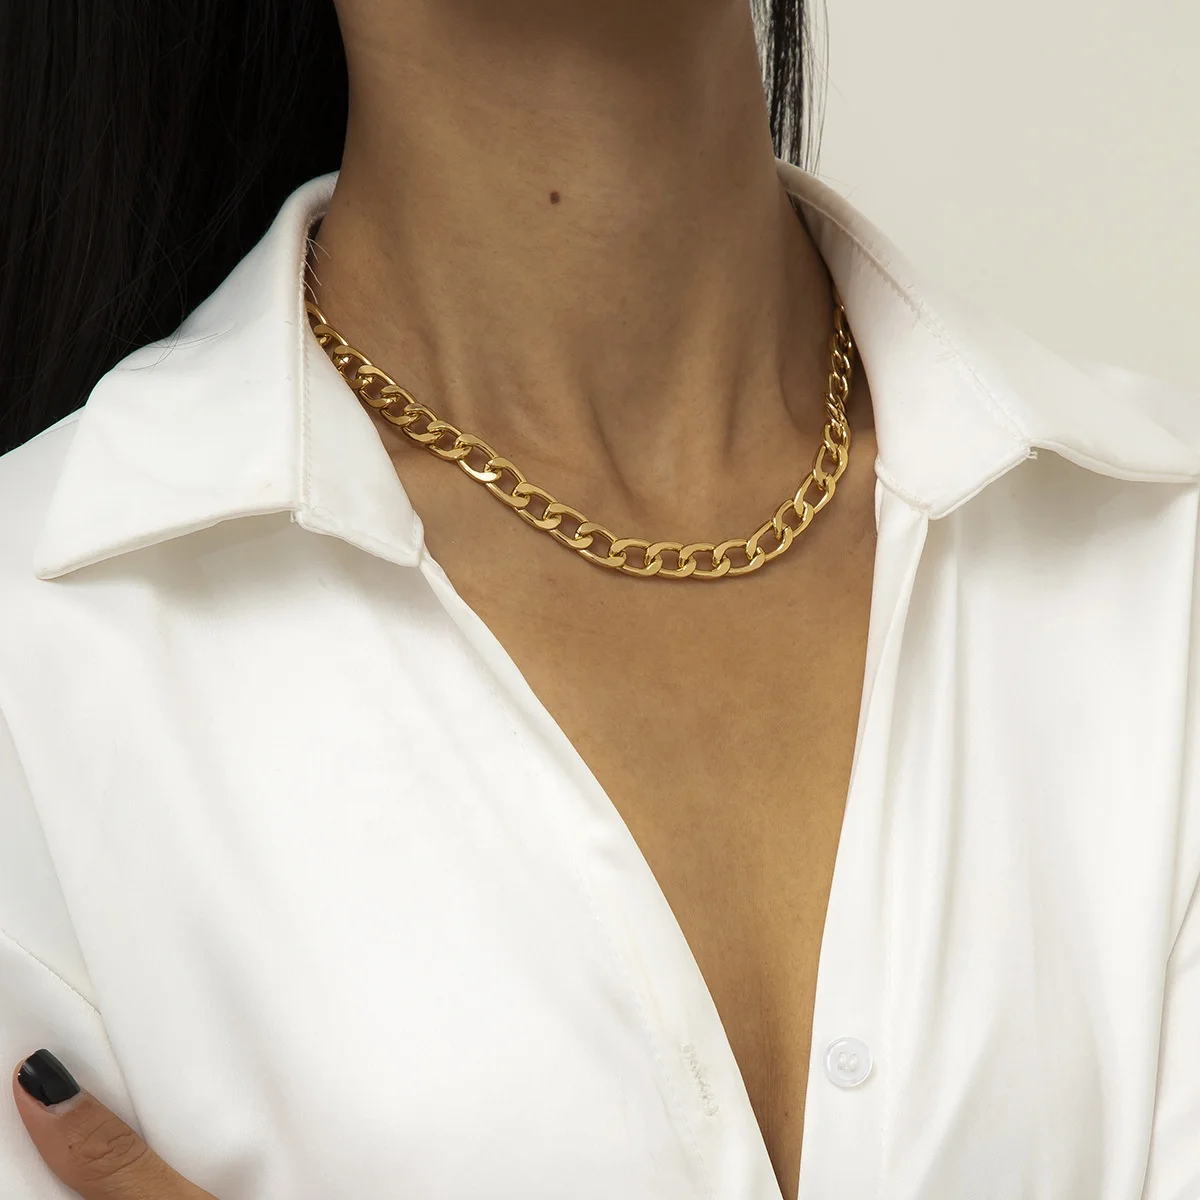 

Vintage Single Layer Solid Color Alloy Clavicle Chain Necklace Hip Hop Simple Women's Chokers Necklaces Girl Gift Jewelry, Picture shows